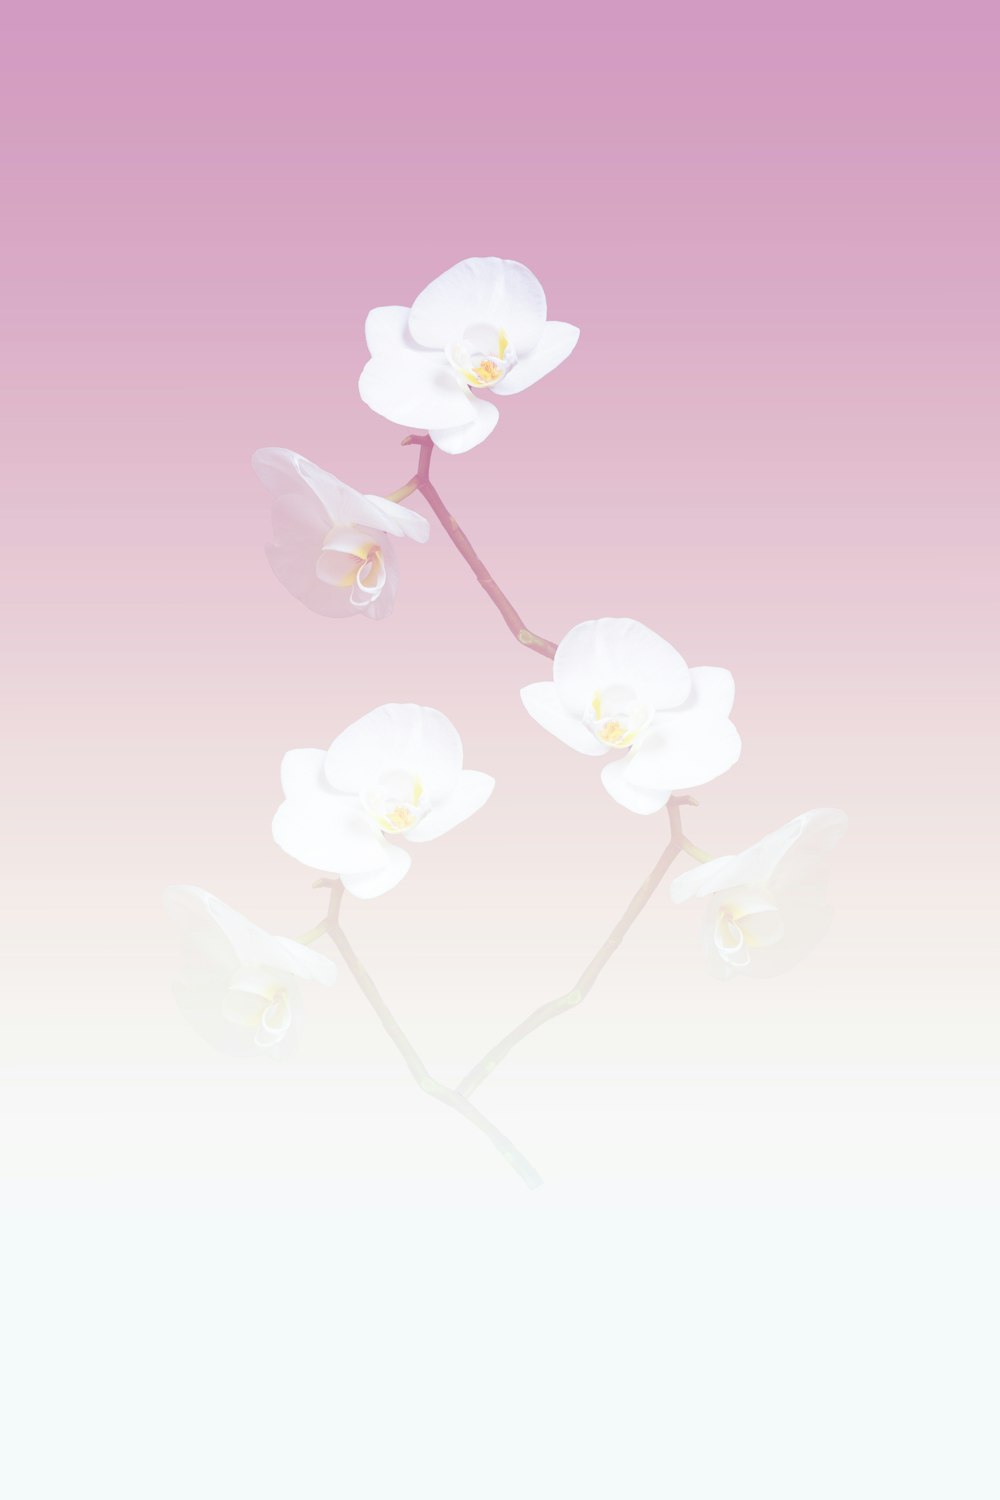 three white orchids on a pink and white background